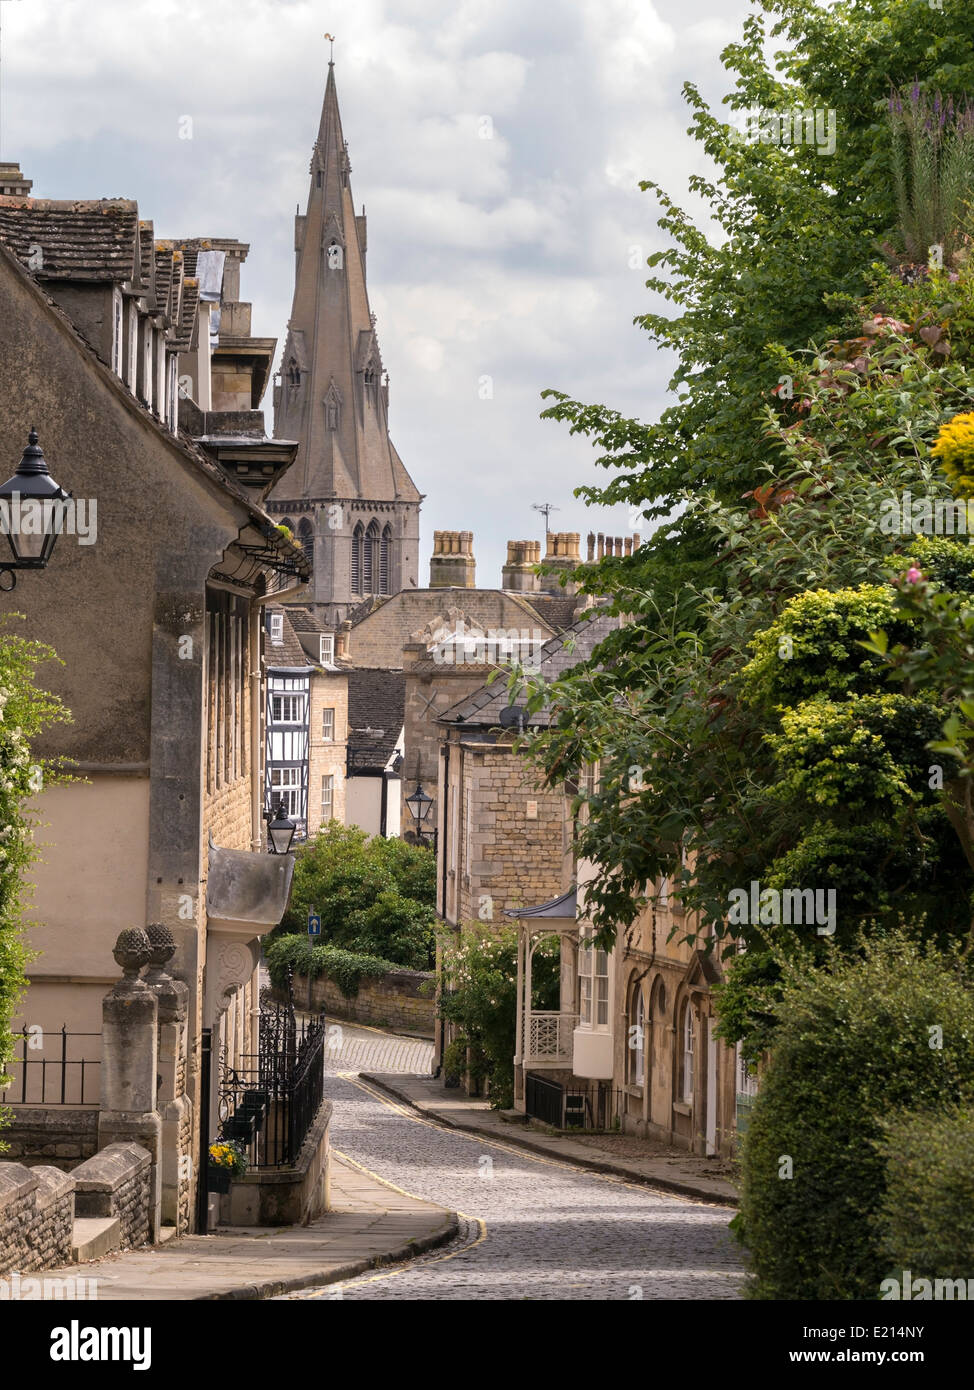 Old narrow cobbled street with stone houses and St Marys Church spire, Barn Hill, Stamford, Lincolnshire, England, UK Stock Photo